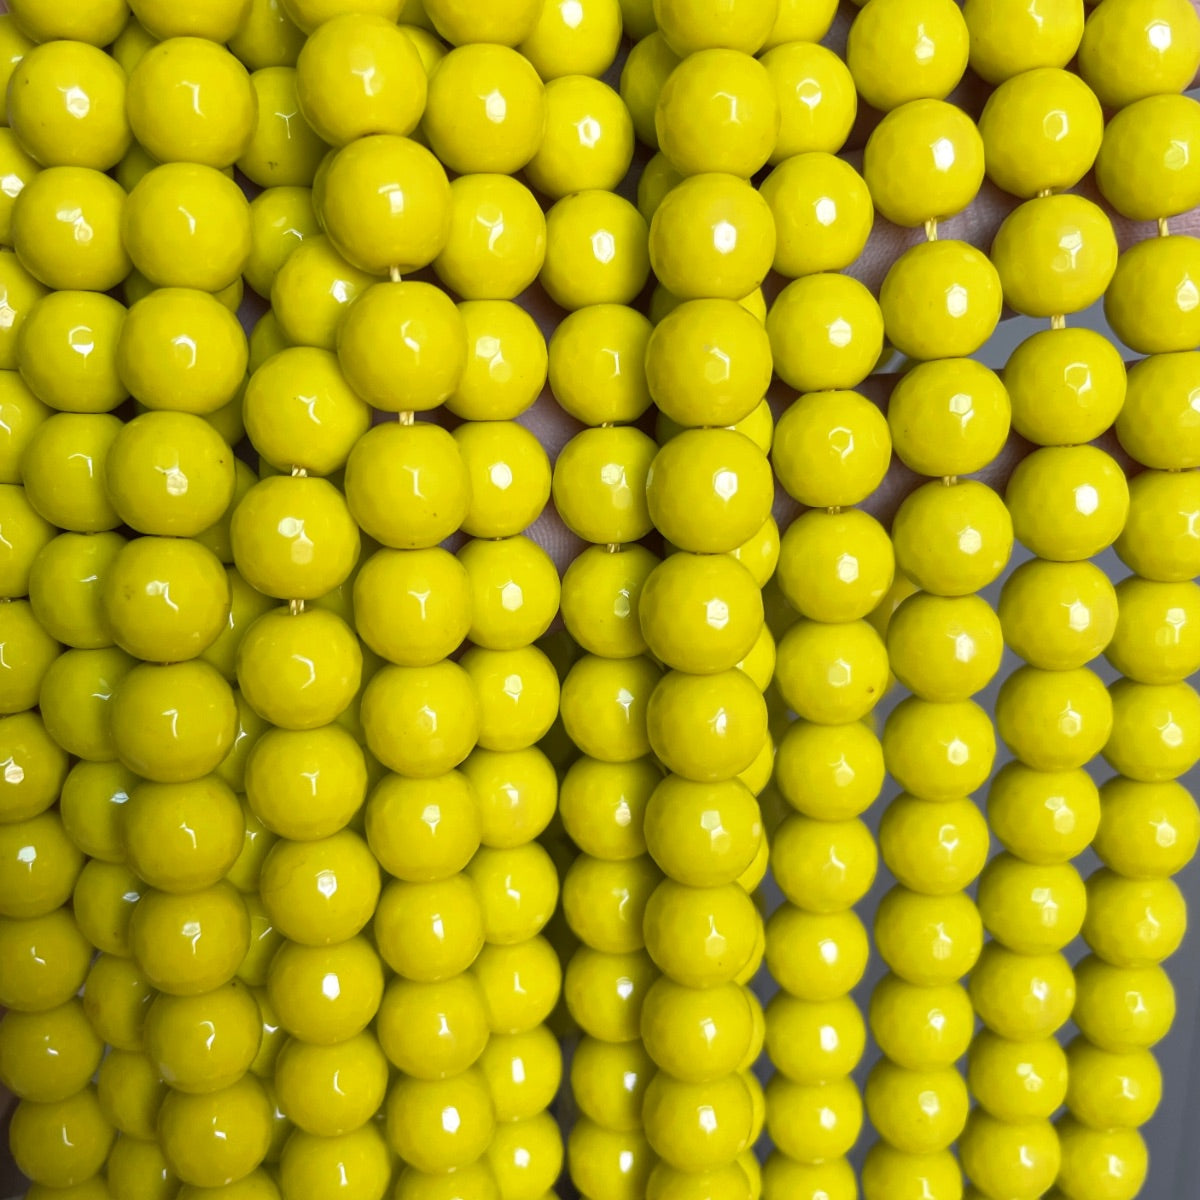 2 Strands/lot 10mm Lemon Yellow Faceted Jade Stone Beads Stone Beads Faceted Jade Beads New Beads Arrivals Charms Beads Beyond